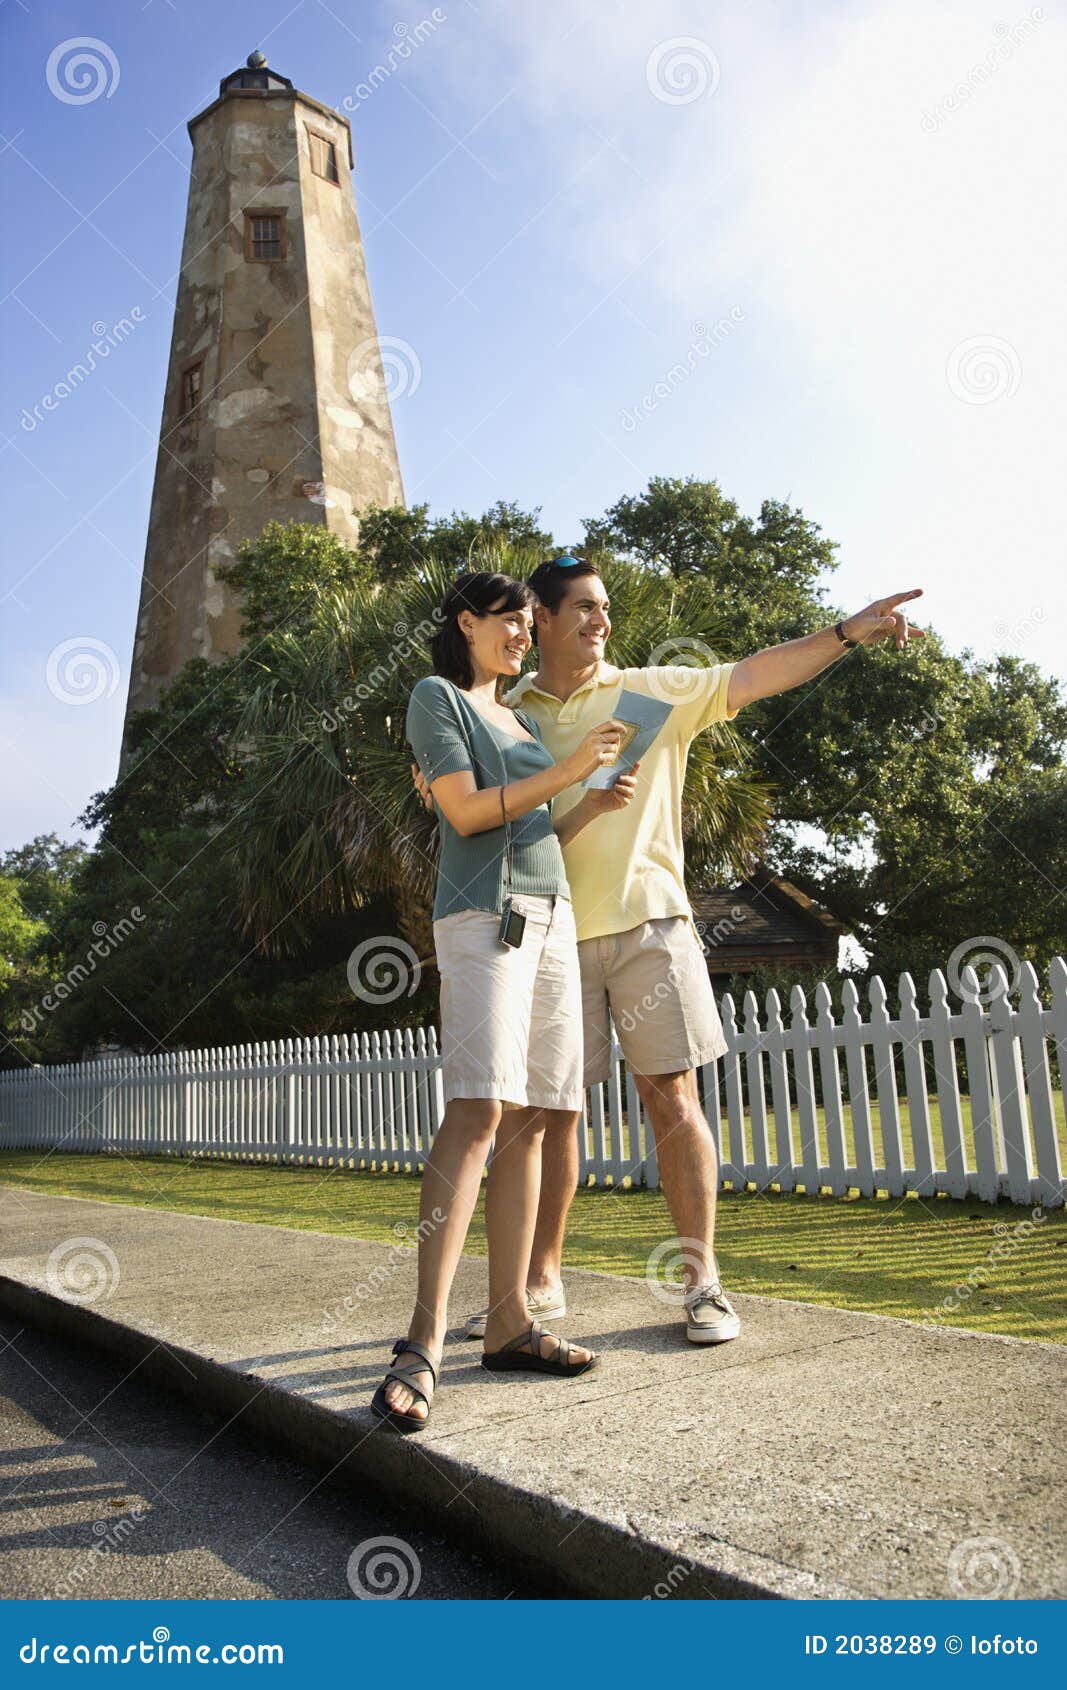 couple sightseeing by lighthouse.